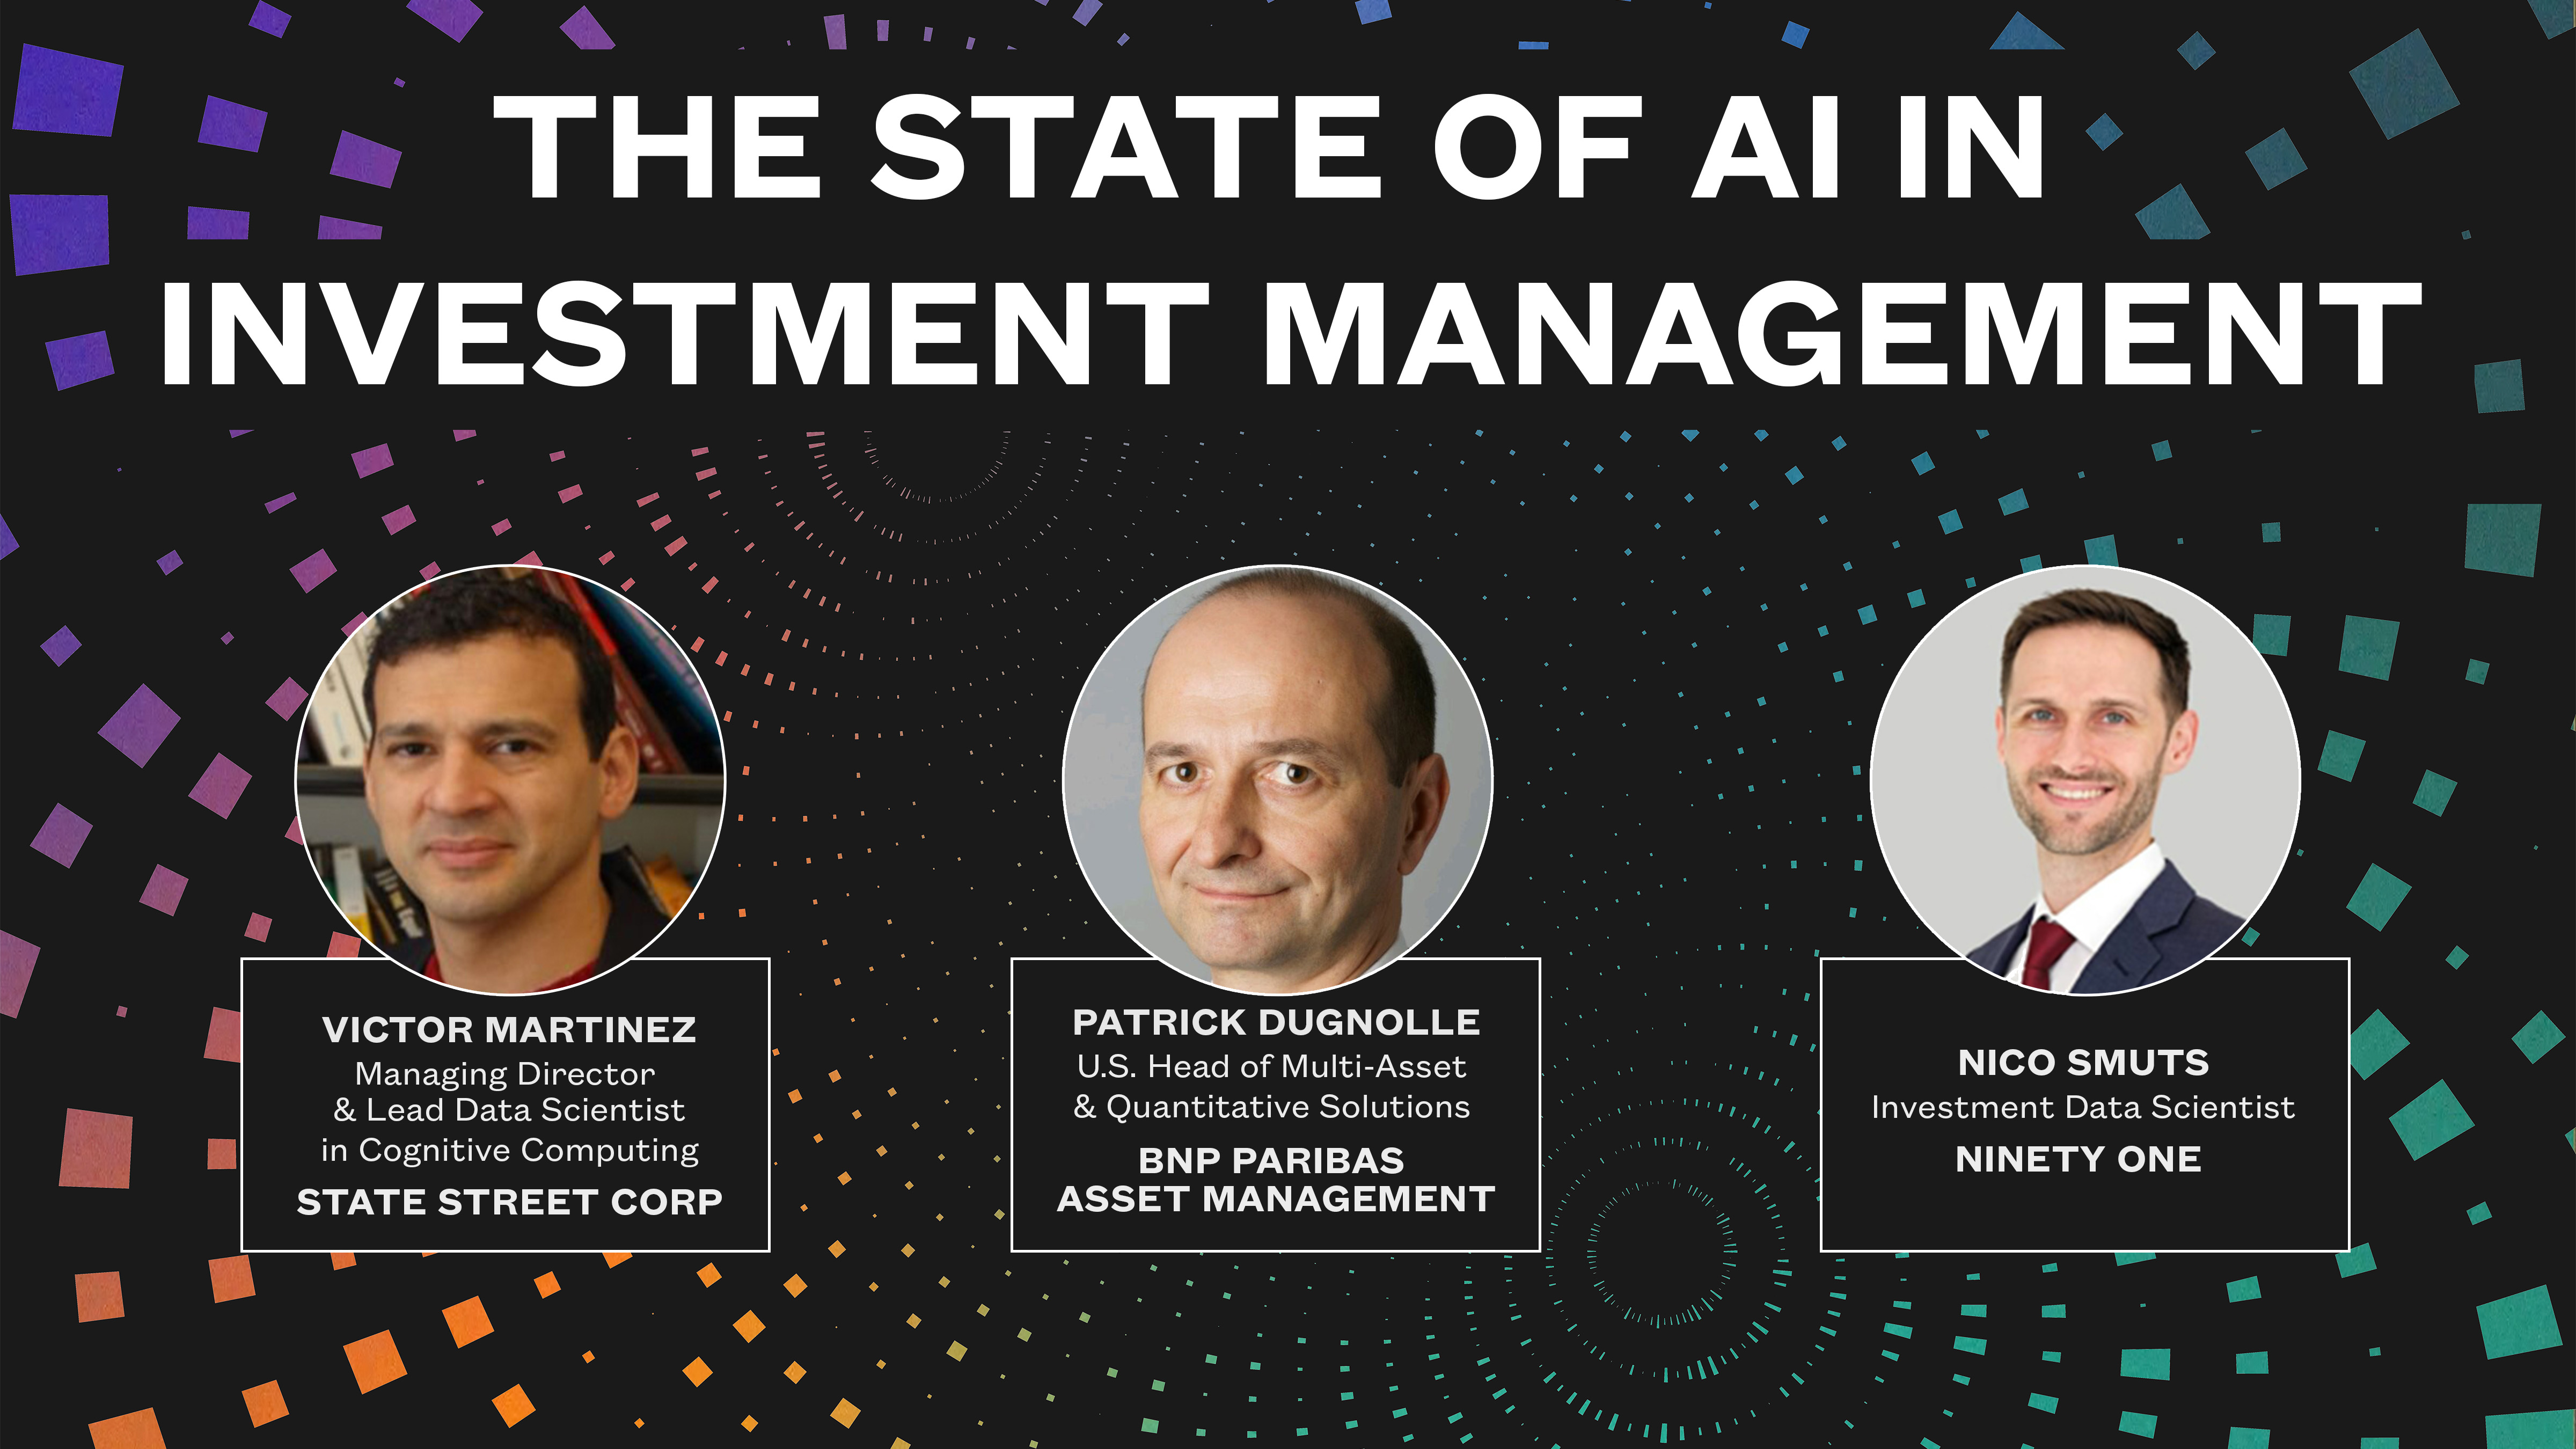 Blending Artificial Intelligence with Human Intelligence - Accorn  Investment Management